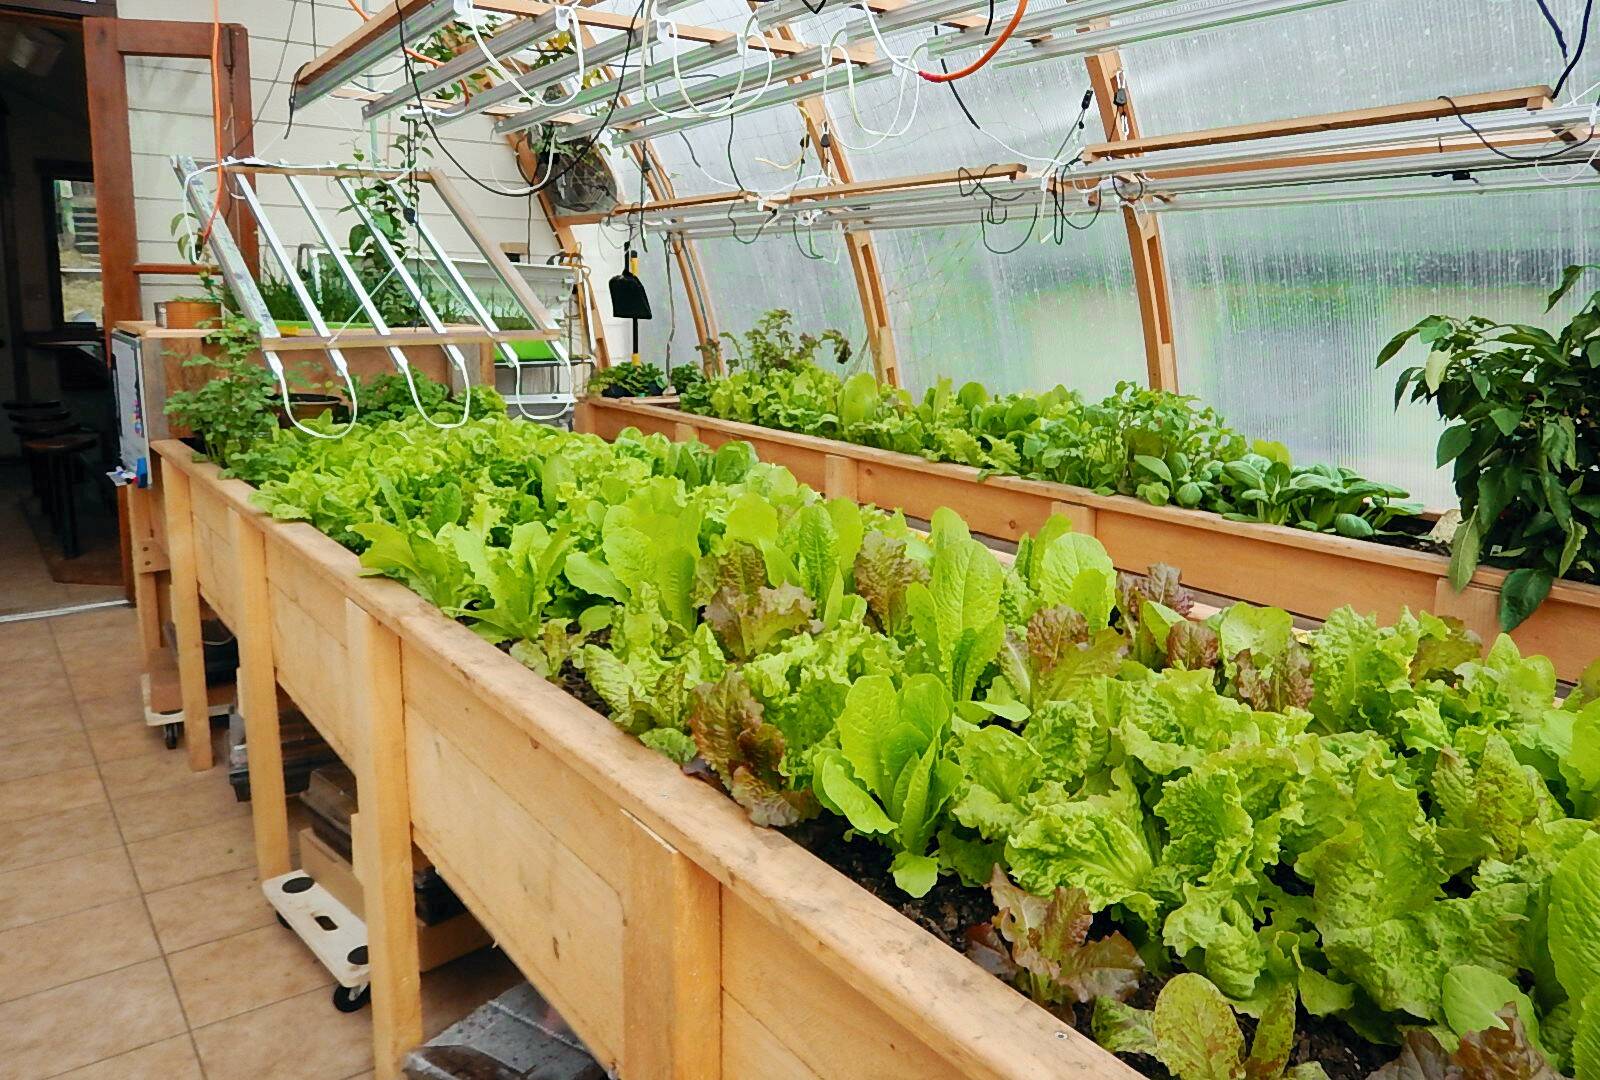 Greens grow in the Tenakee Springs greenhouse run by Kevin and Carlene Allred. The greenhouse produces fresh produce all year long using geothermal heat. (Courtesy photo/Kevin and Carlene Allred)